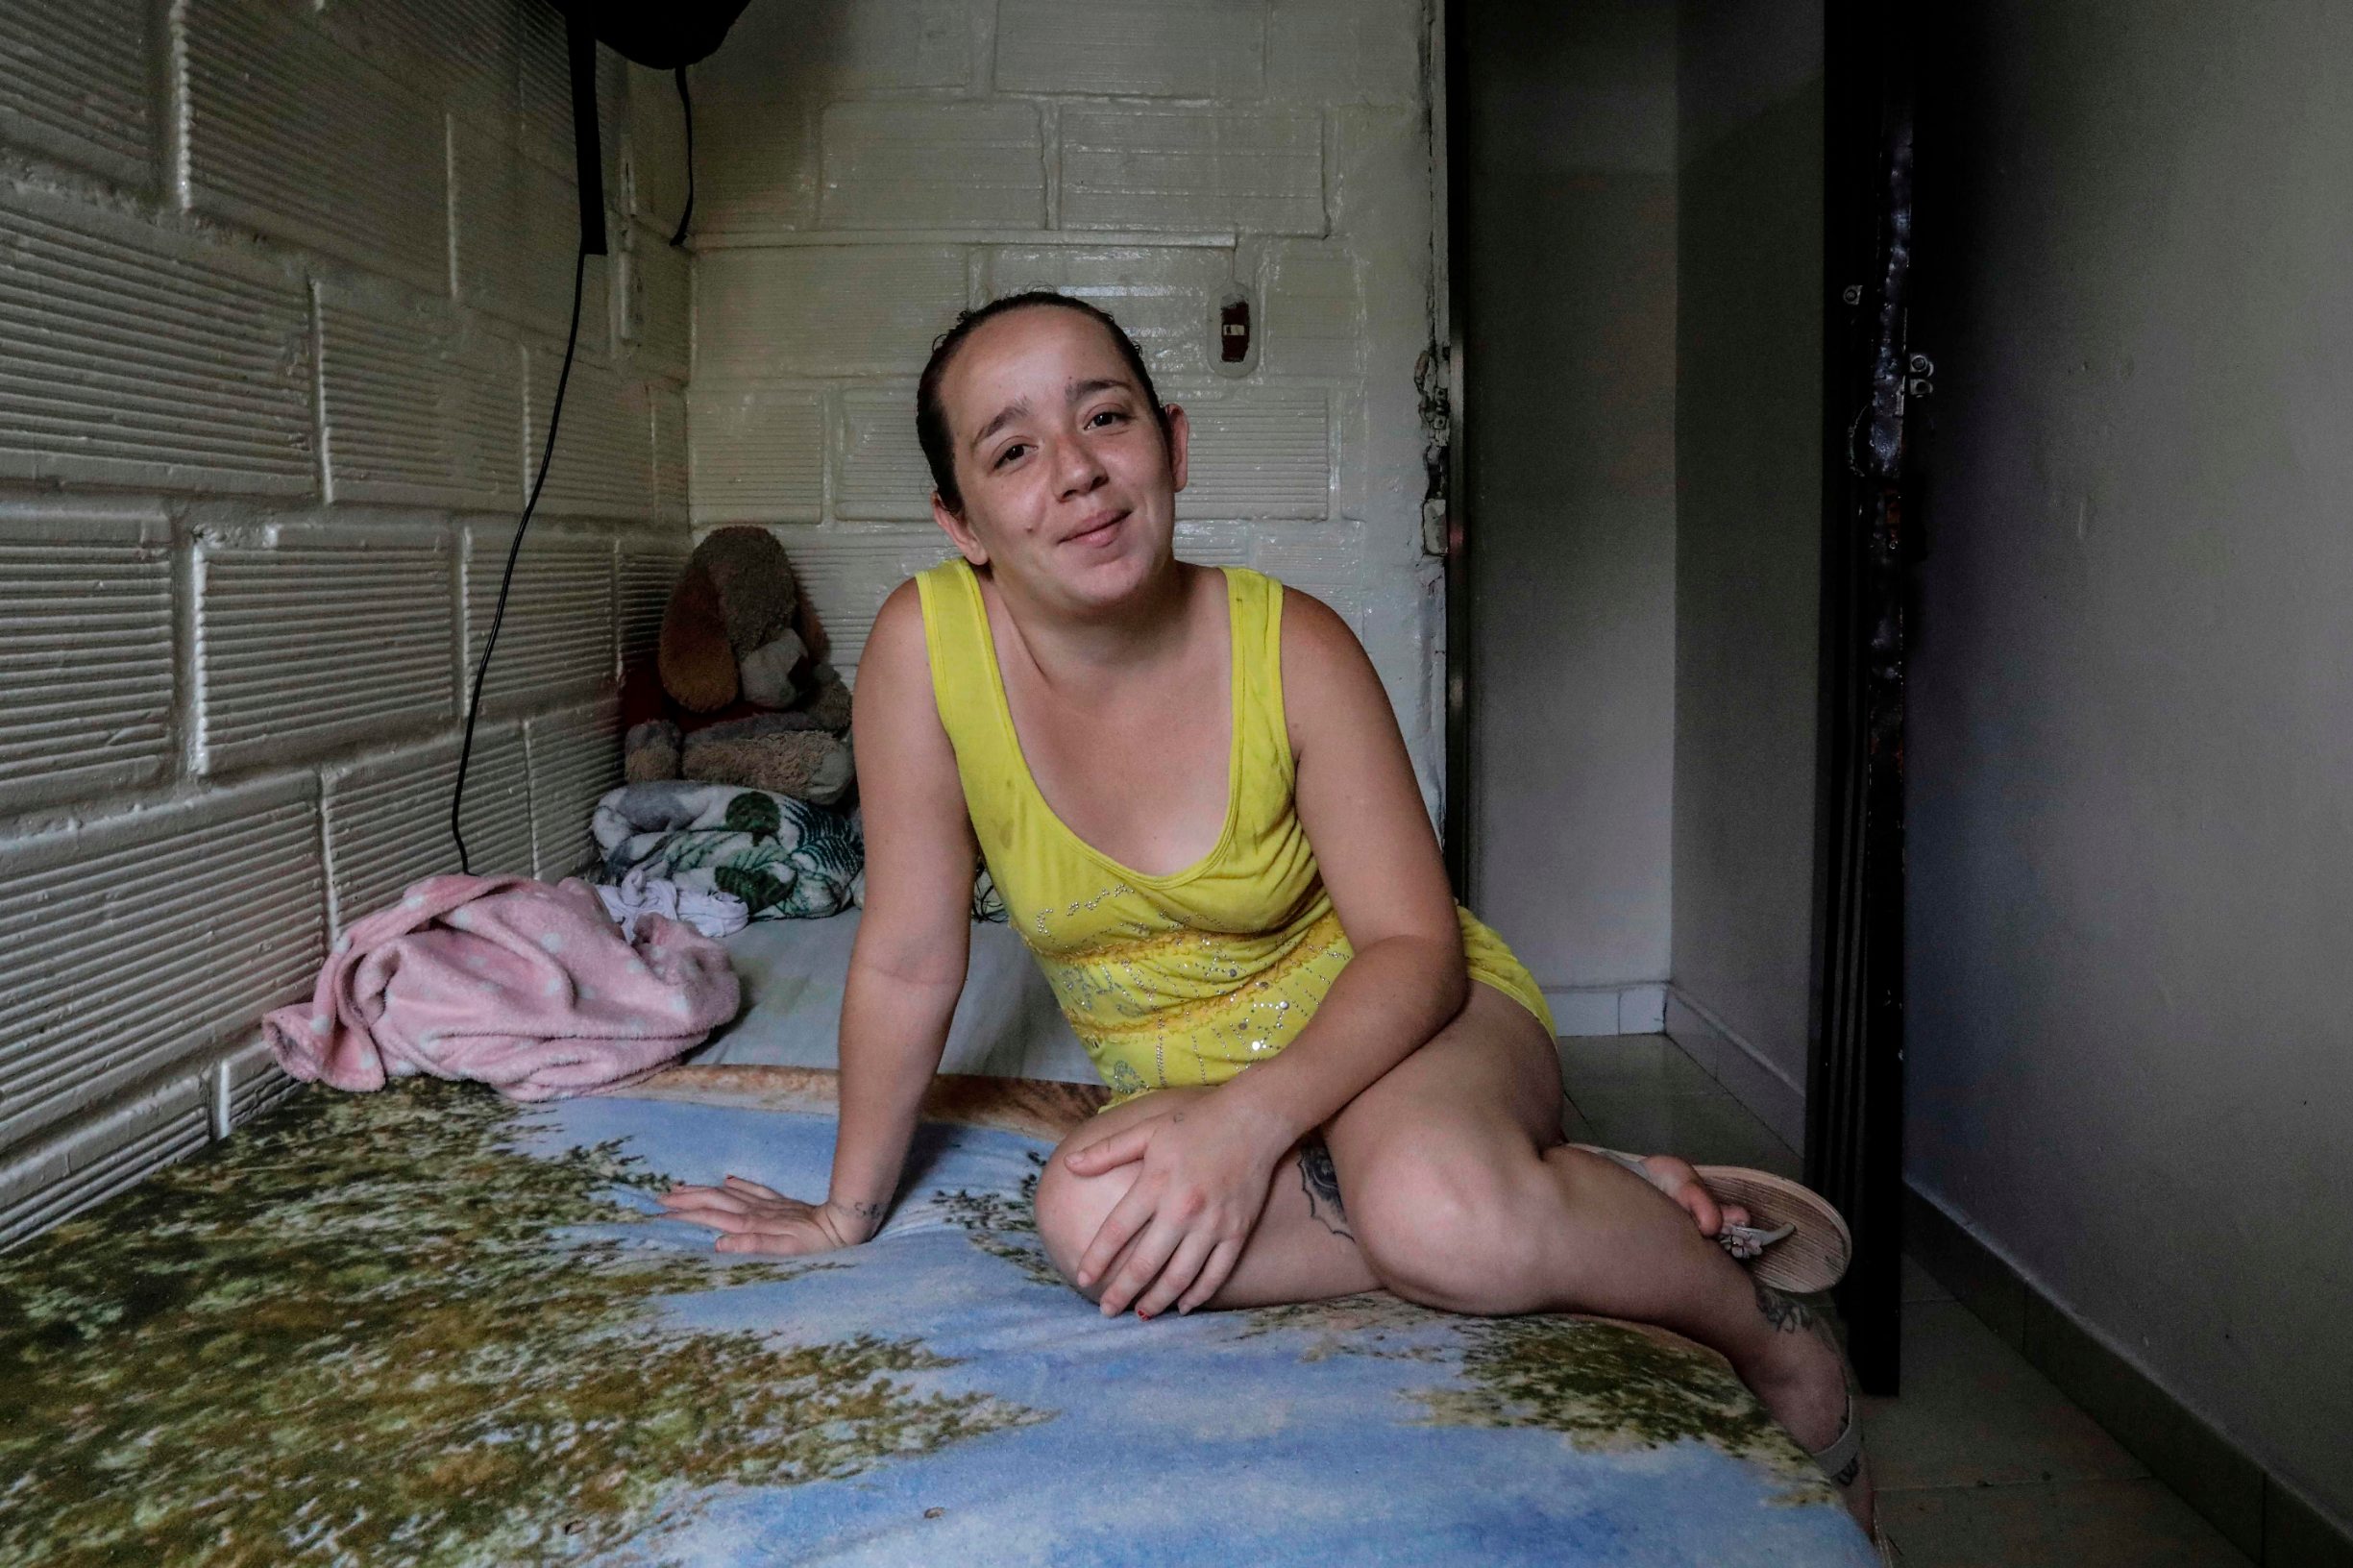 Sex worker Estefania poses for a picture in her bedroom at a low cost hotel located in the Tolerance zone known as the Raudal Sector, where sex workers live and work in Medellin, Colombia, on April 8, 2020. (Photo by Joaquin SARMIENTO / AFP)